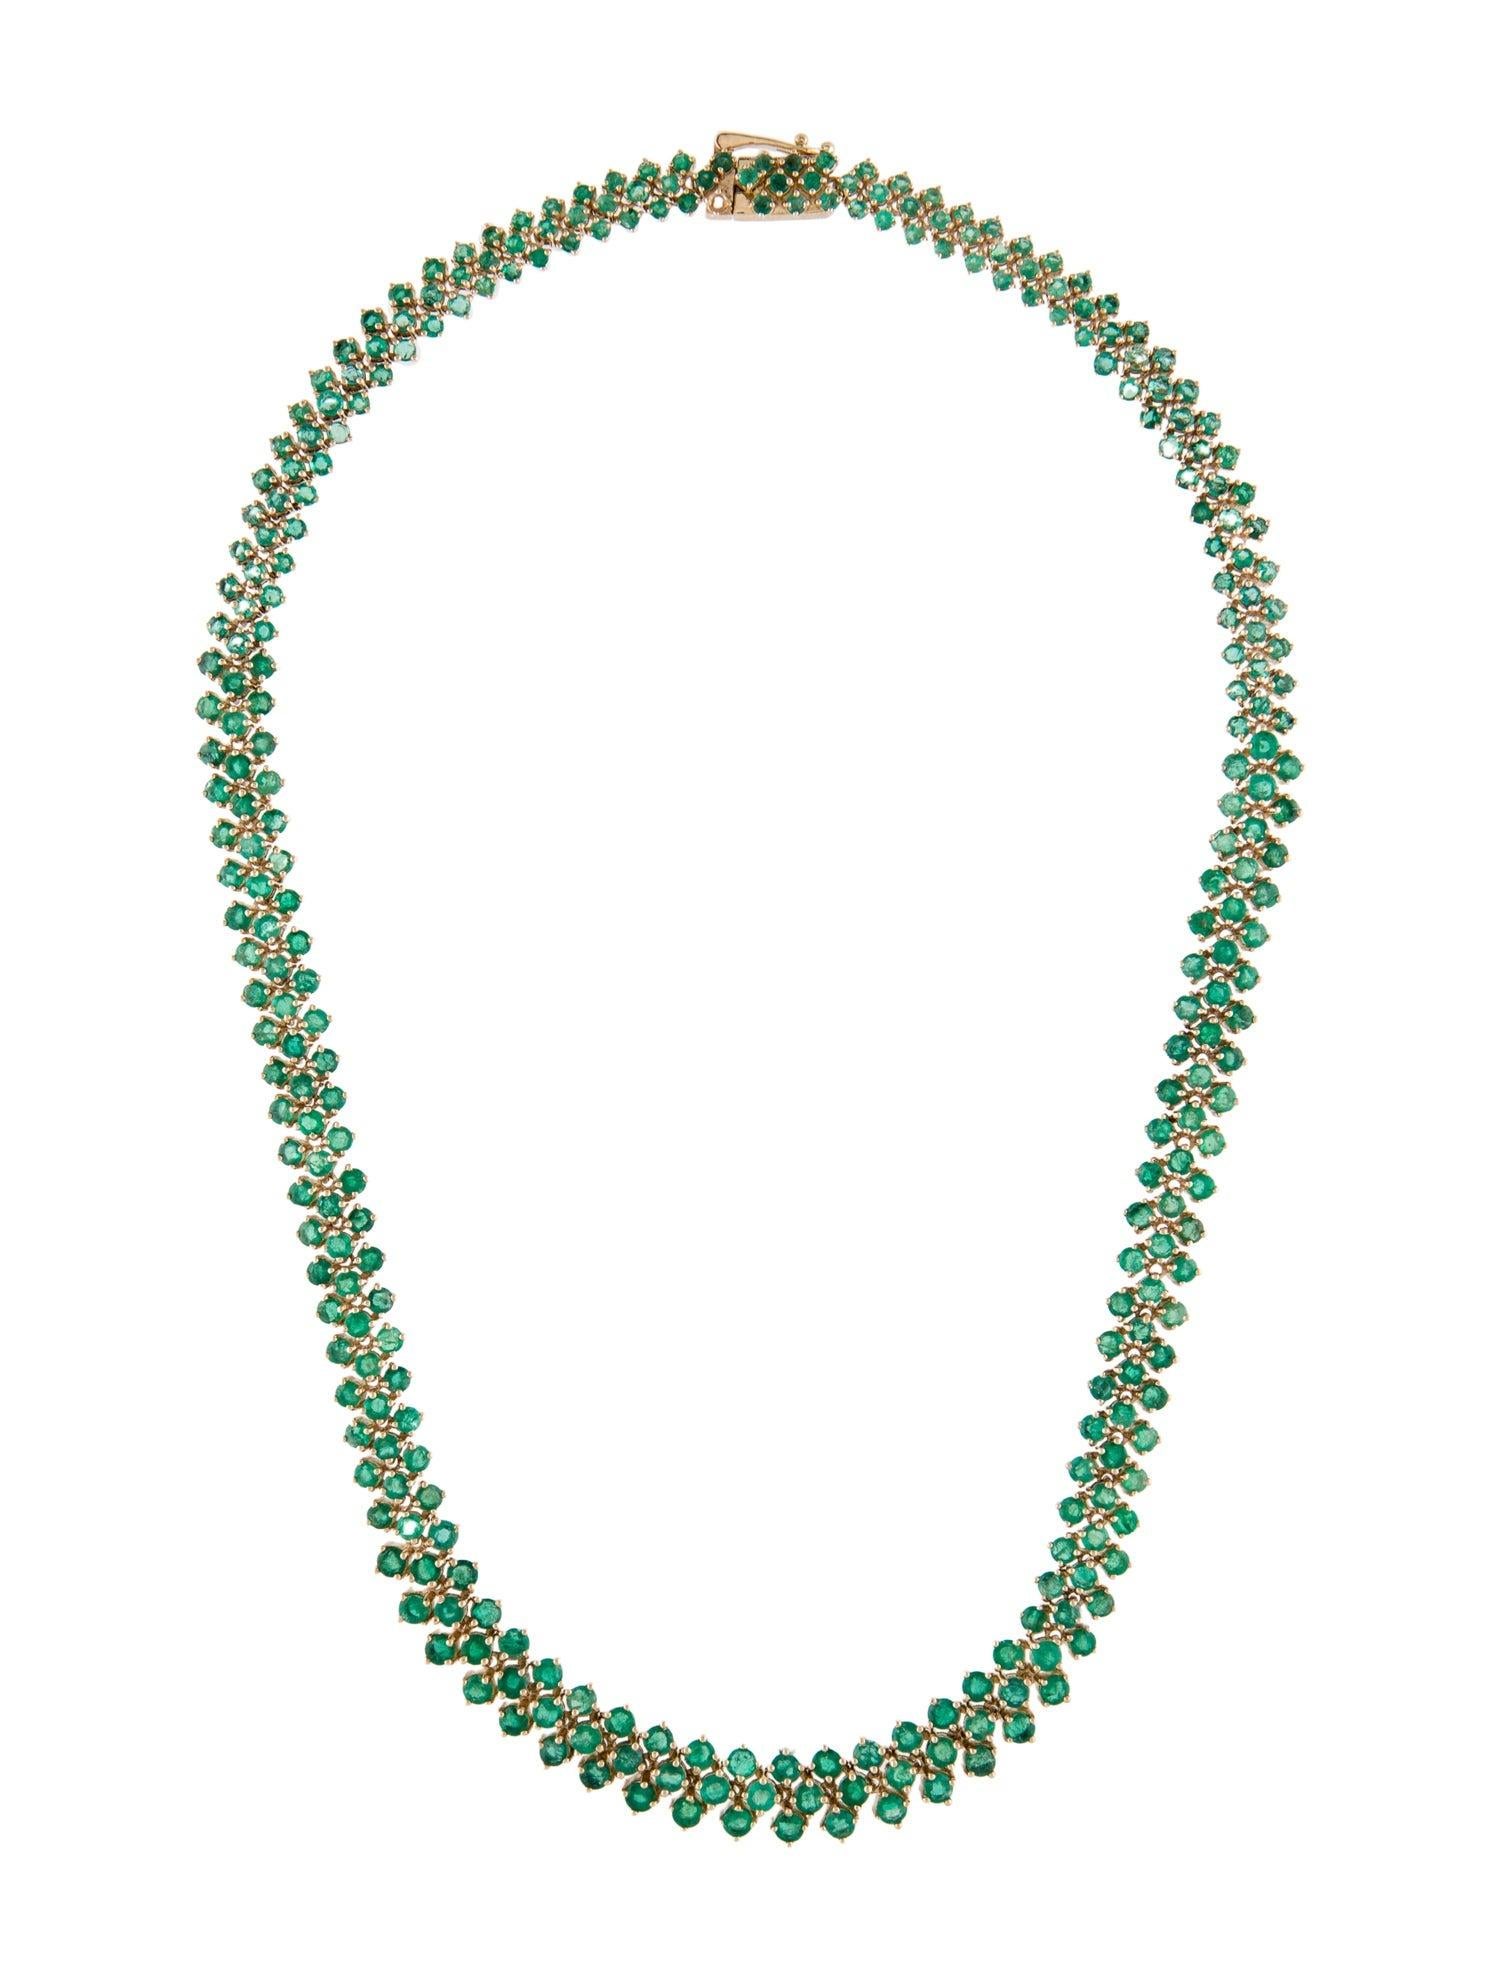 14K Emerald Graduated Collar Necklace: Exquisite Luxury Statement Jewelry Piece In New Condition For Sale In Holtsville, NY